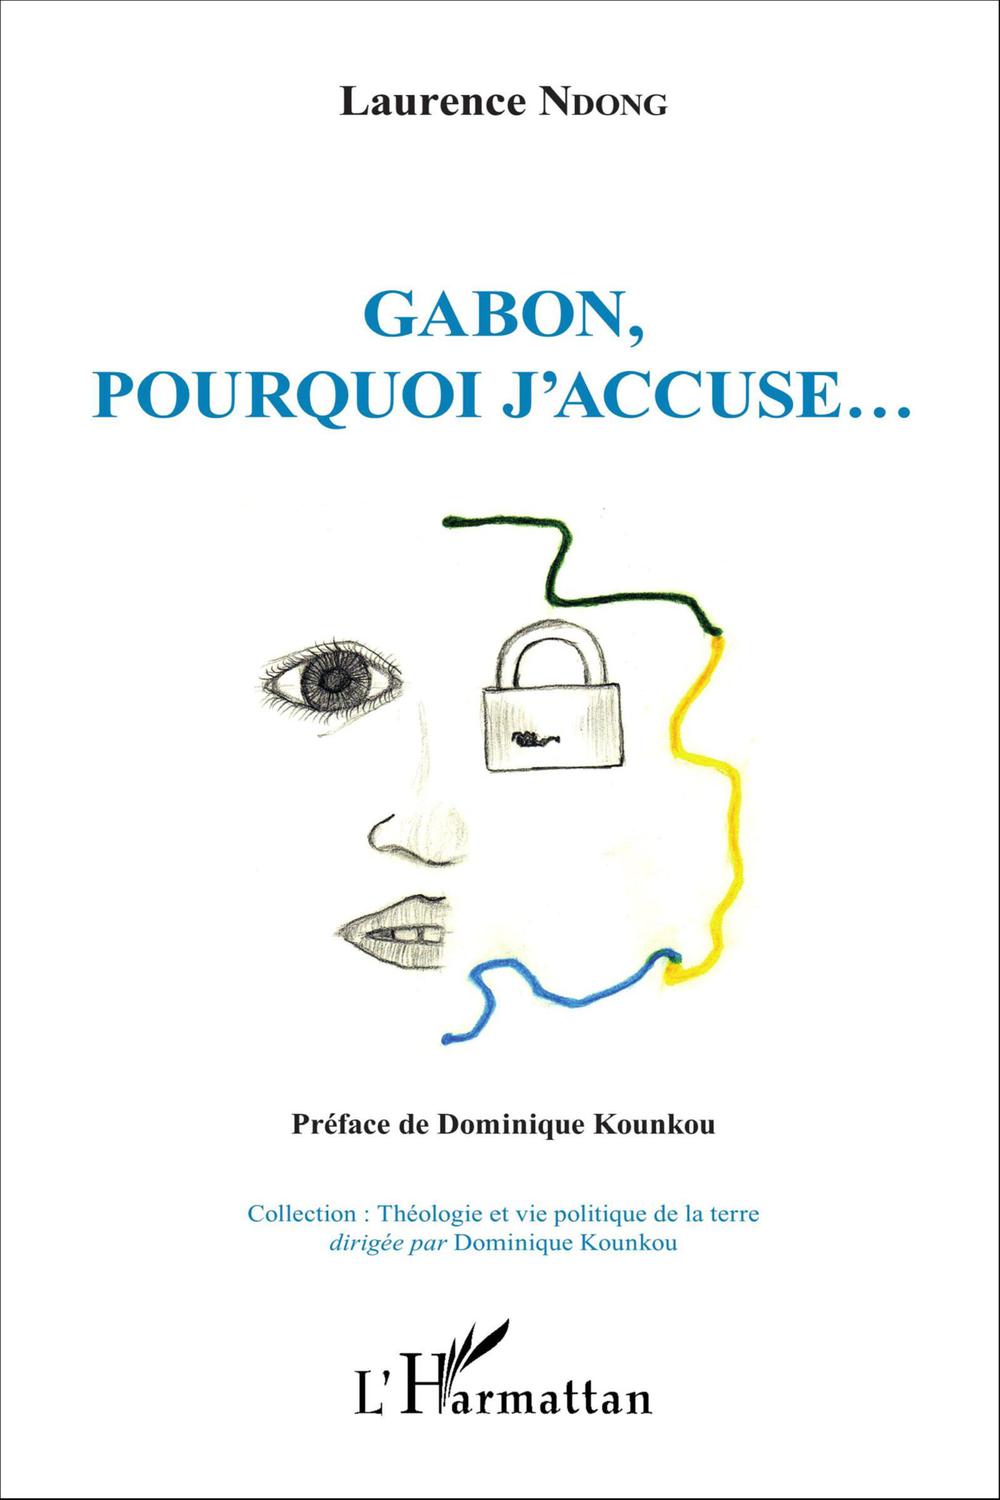 Gabon, pourquoi j'accuse... - Laurence Ndong